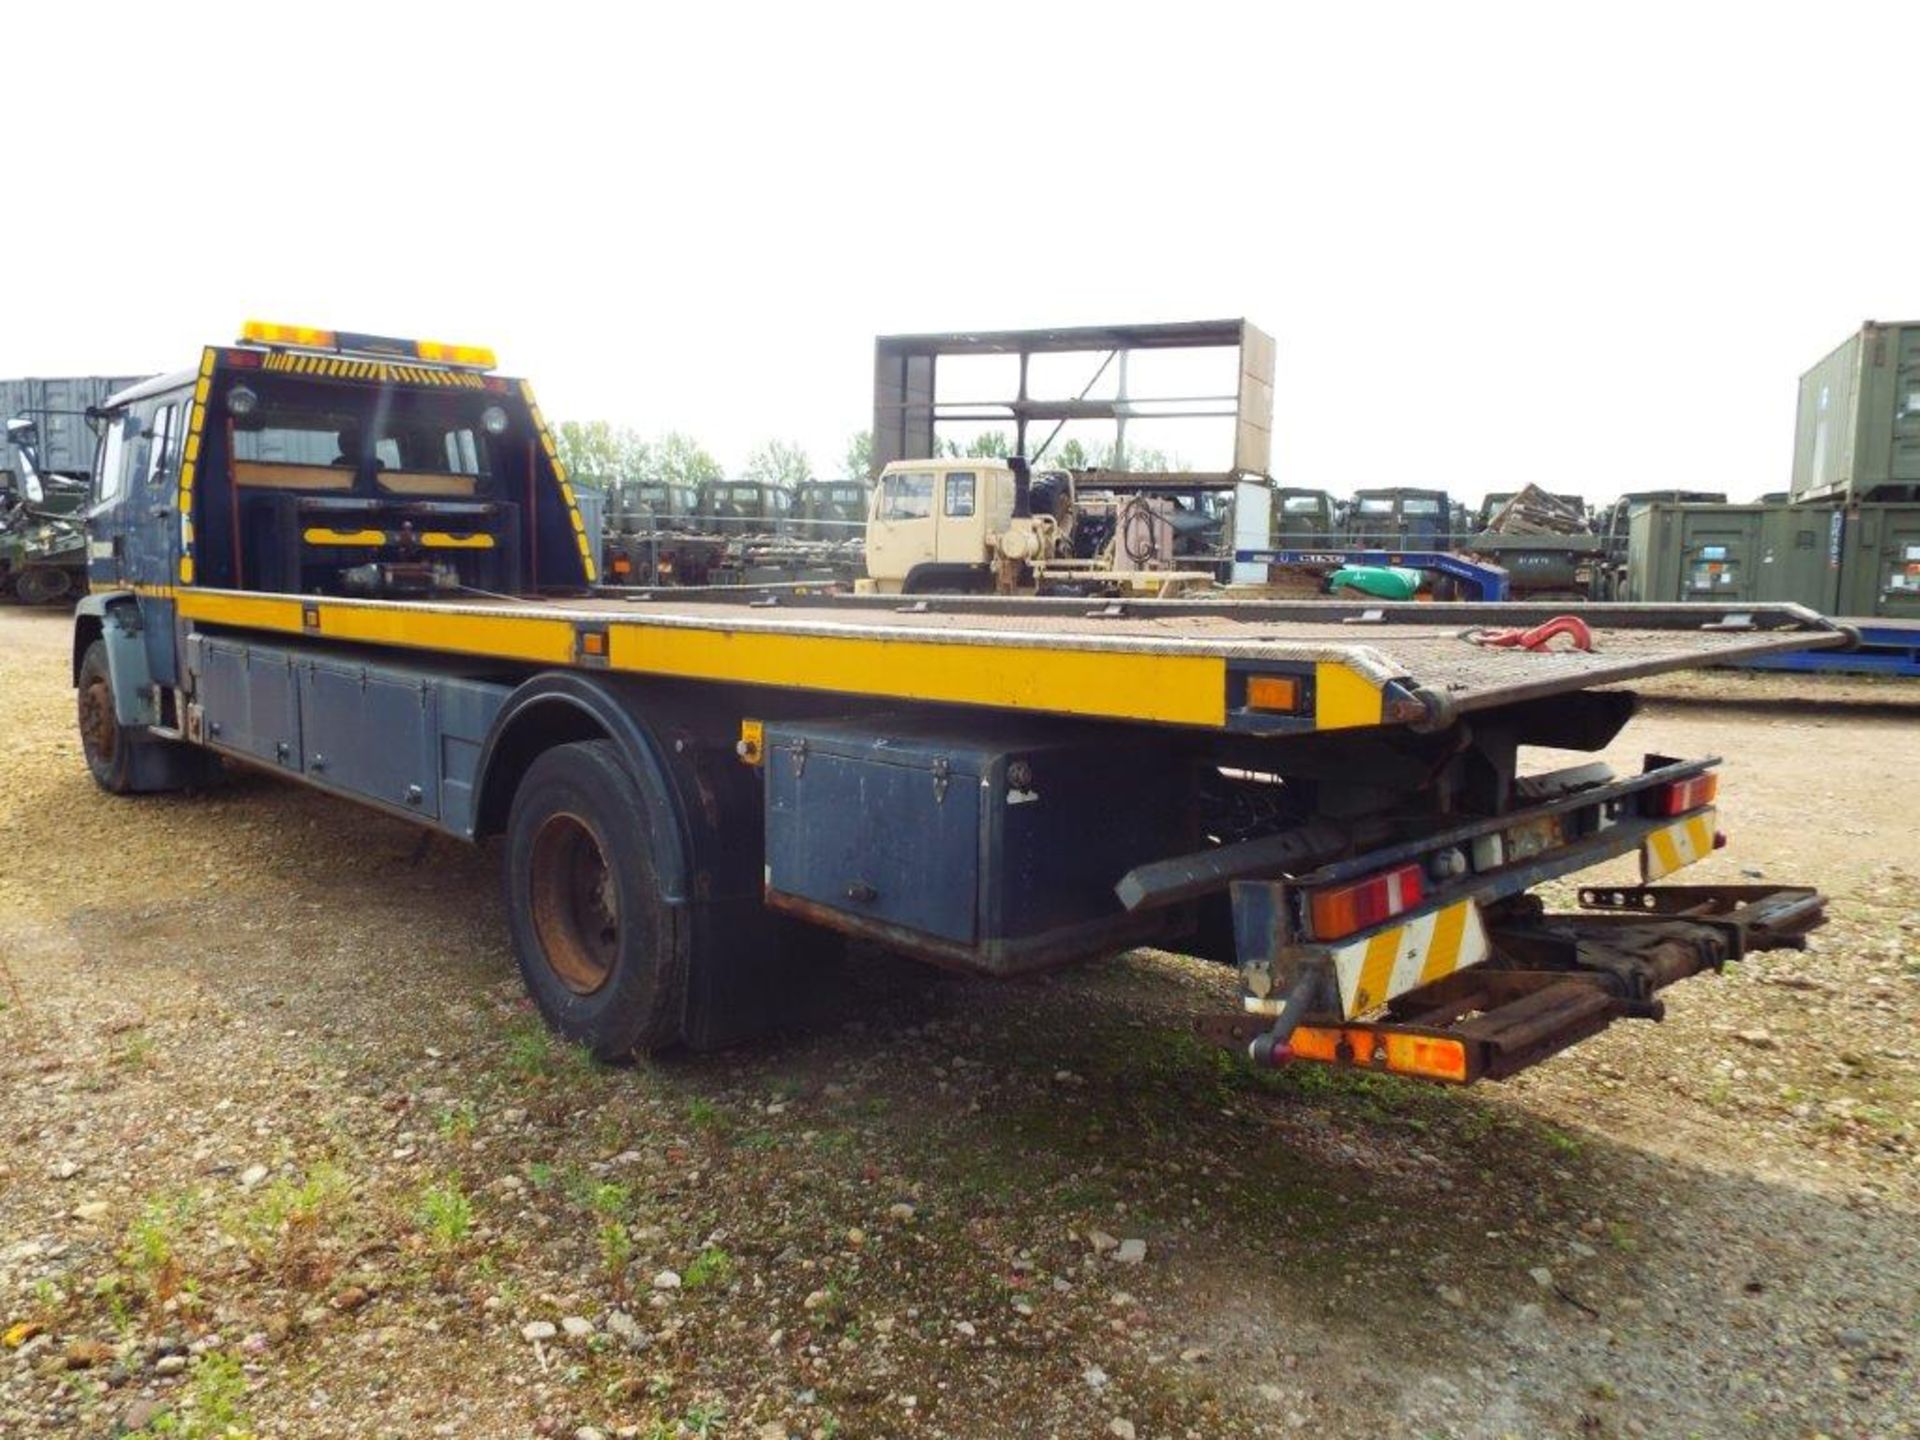 Leyland DAF 55 210 Crew Cab 18T Tilt and Slide Recovery Vehicle with Underlift and 2 x Winches - Image 5 of 32